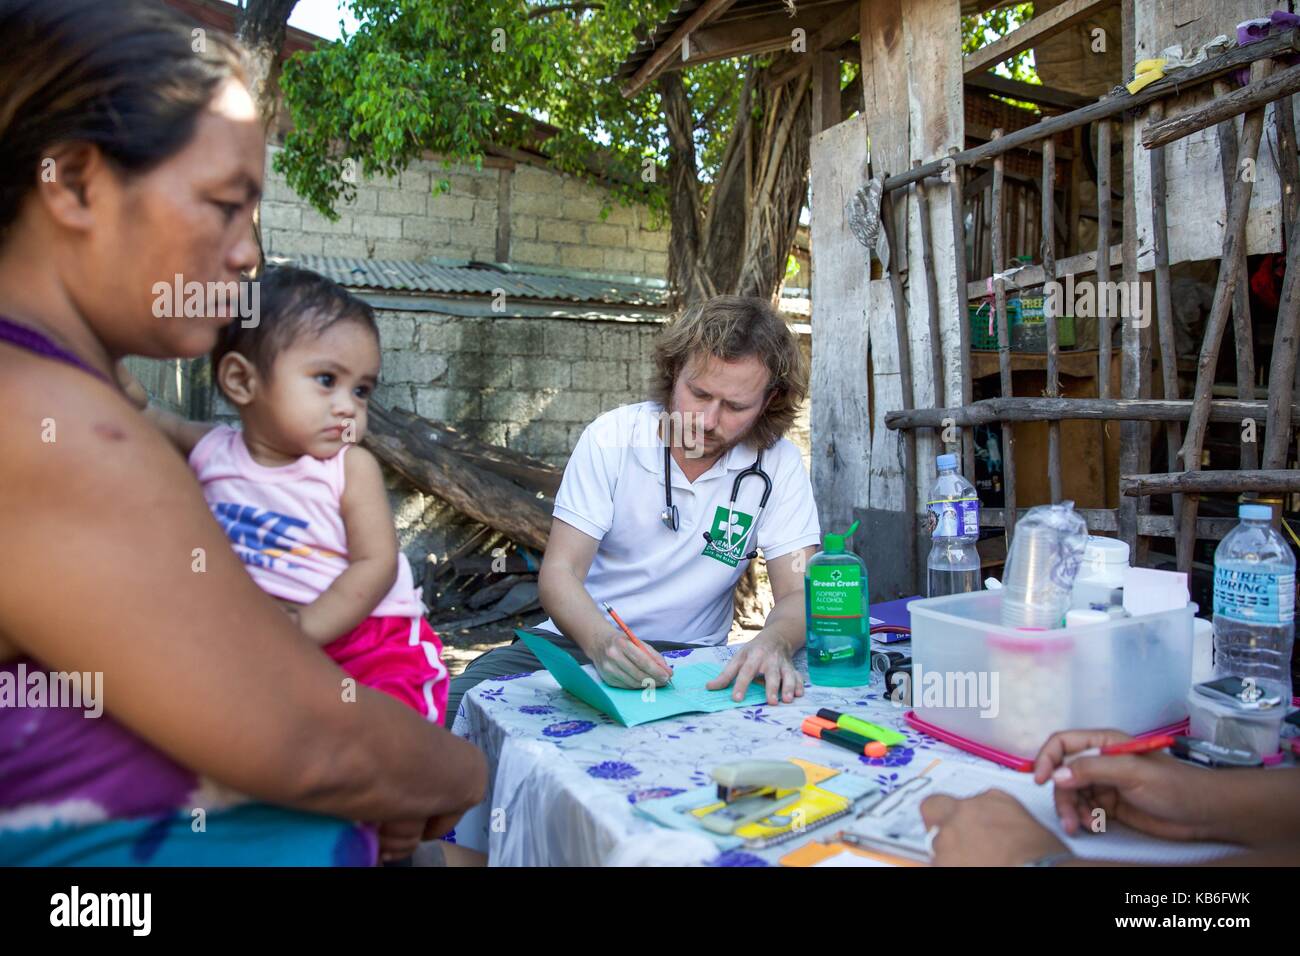 Cebu City is a metropolis with countless slums, street kids, whole families living on the street, cemeteries or rubbish dumps. Just the German Doctors come regularly and provide medical assistance. April 2016 | usage worldwide Stock Photo